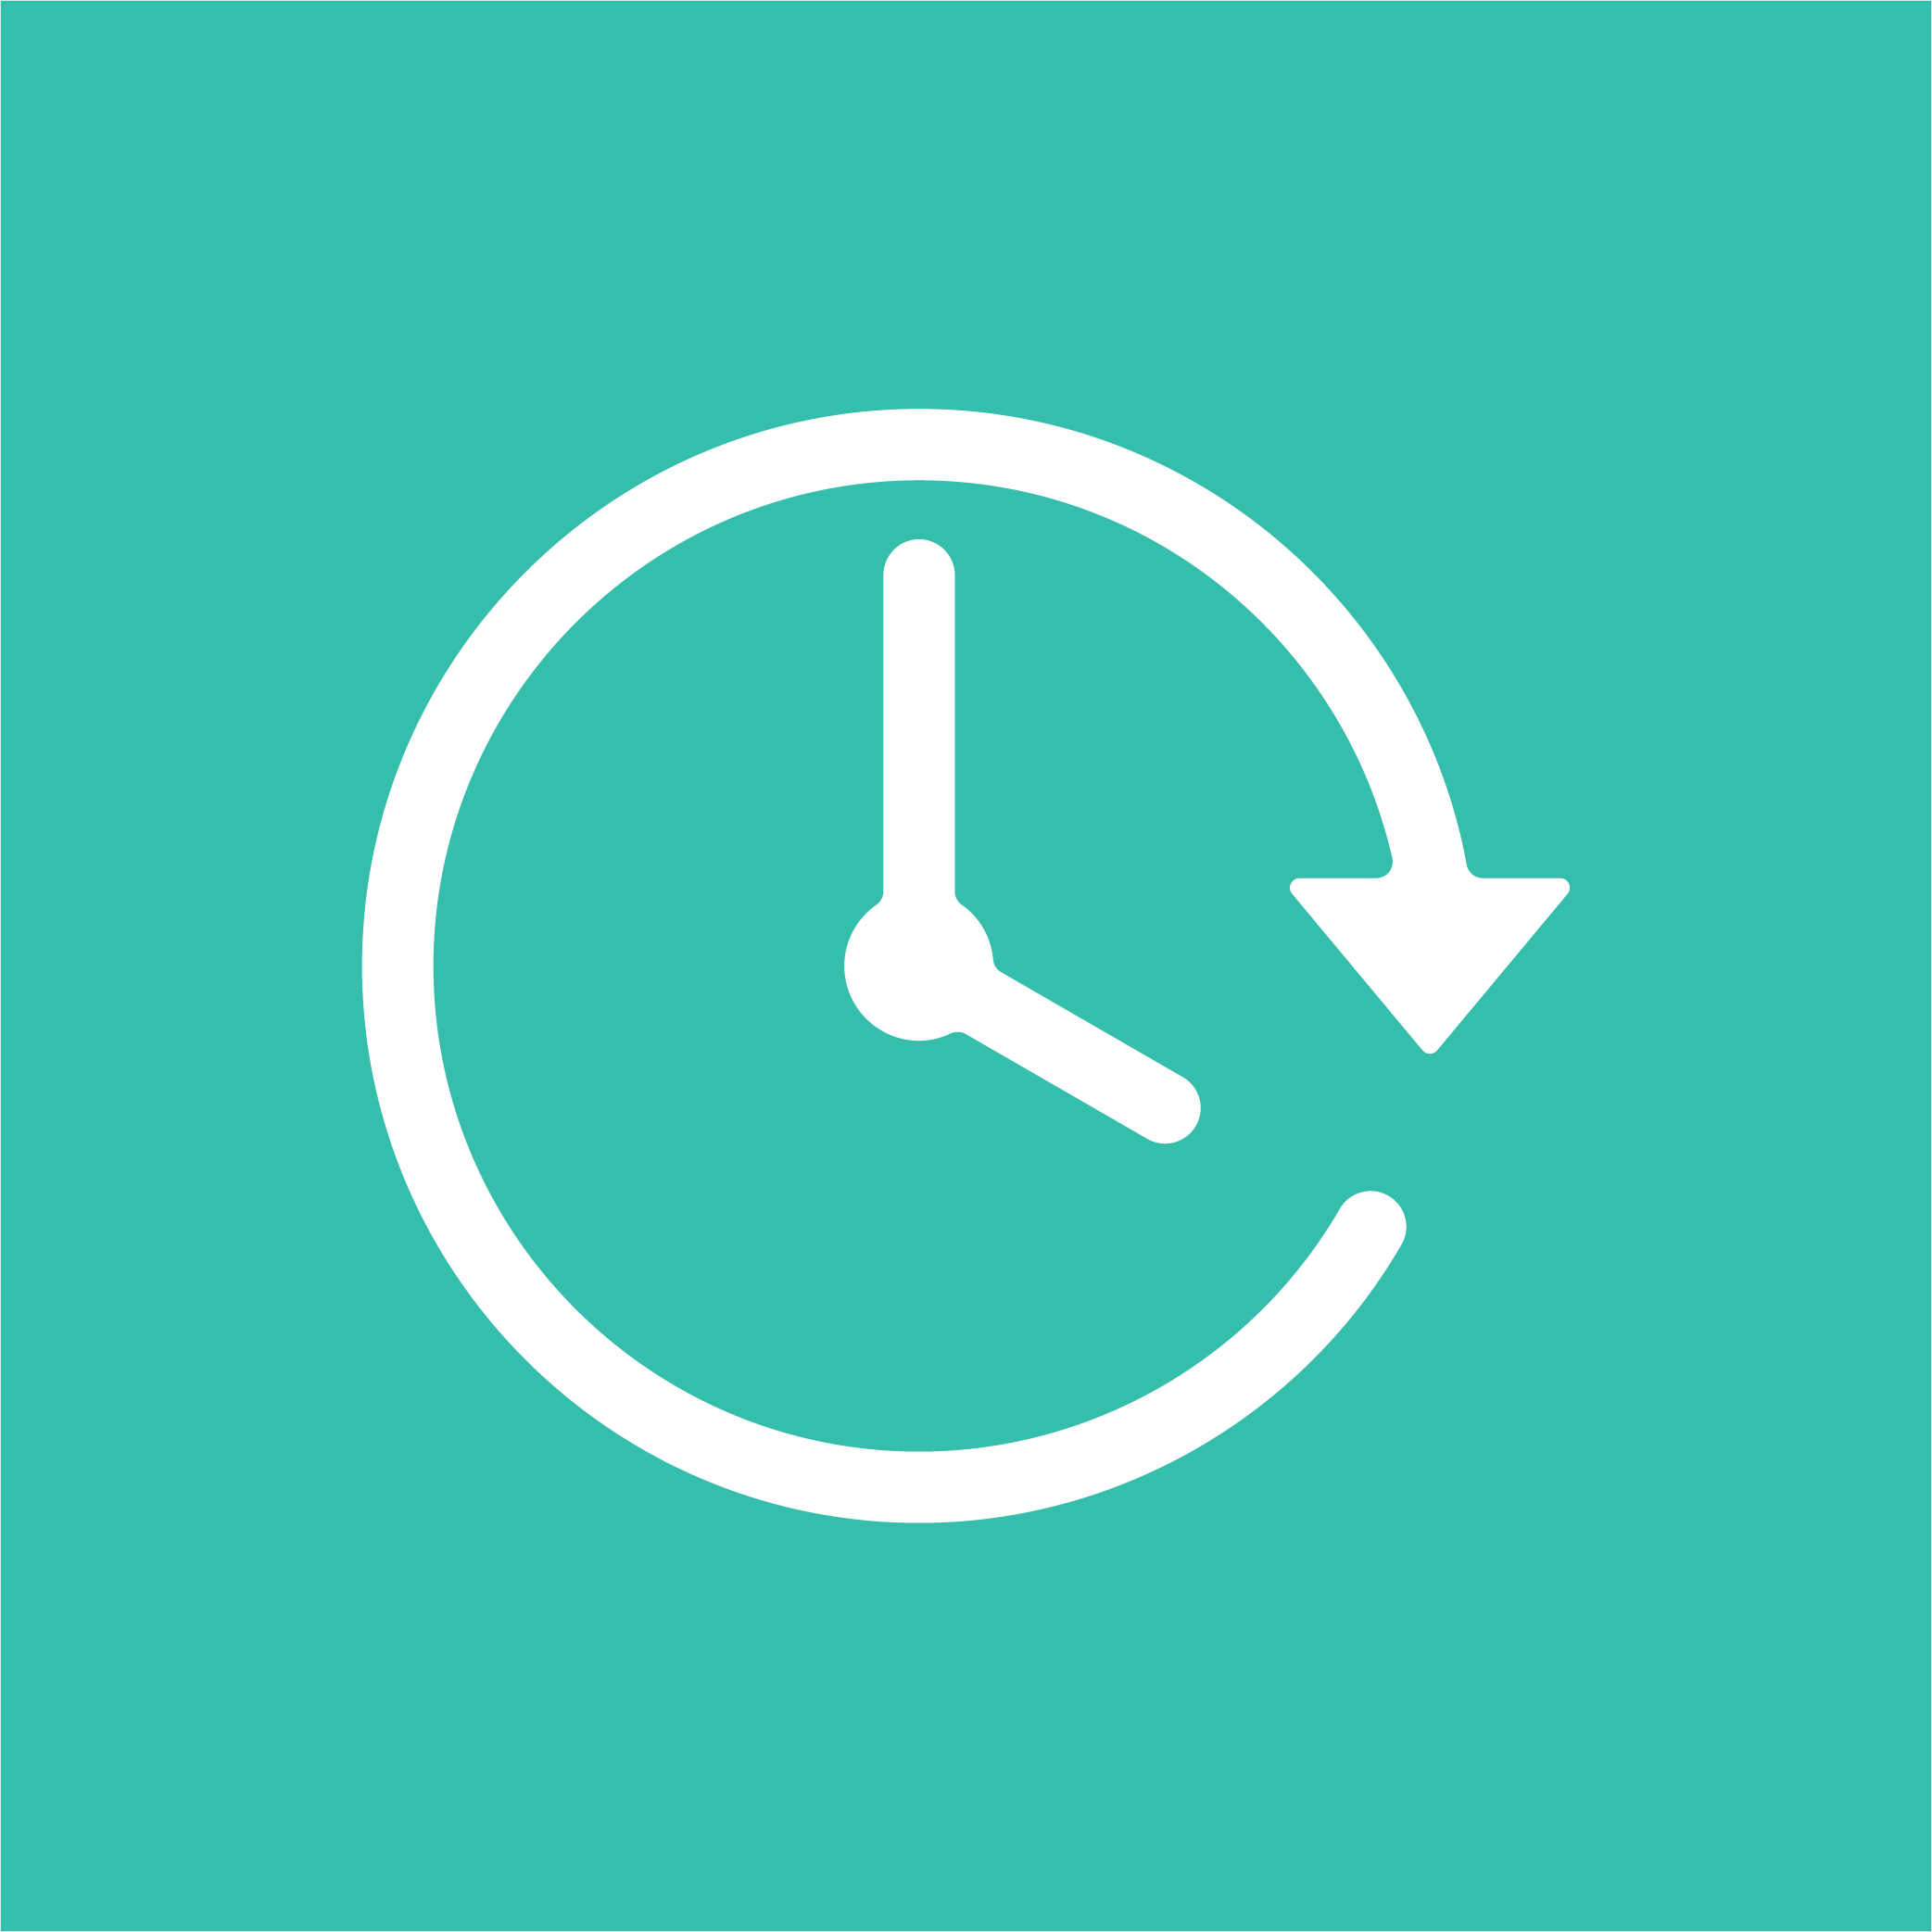 White trading hours clock icon with aqua background